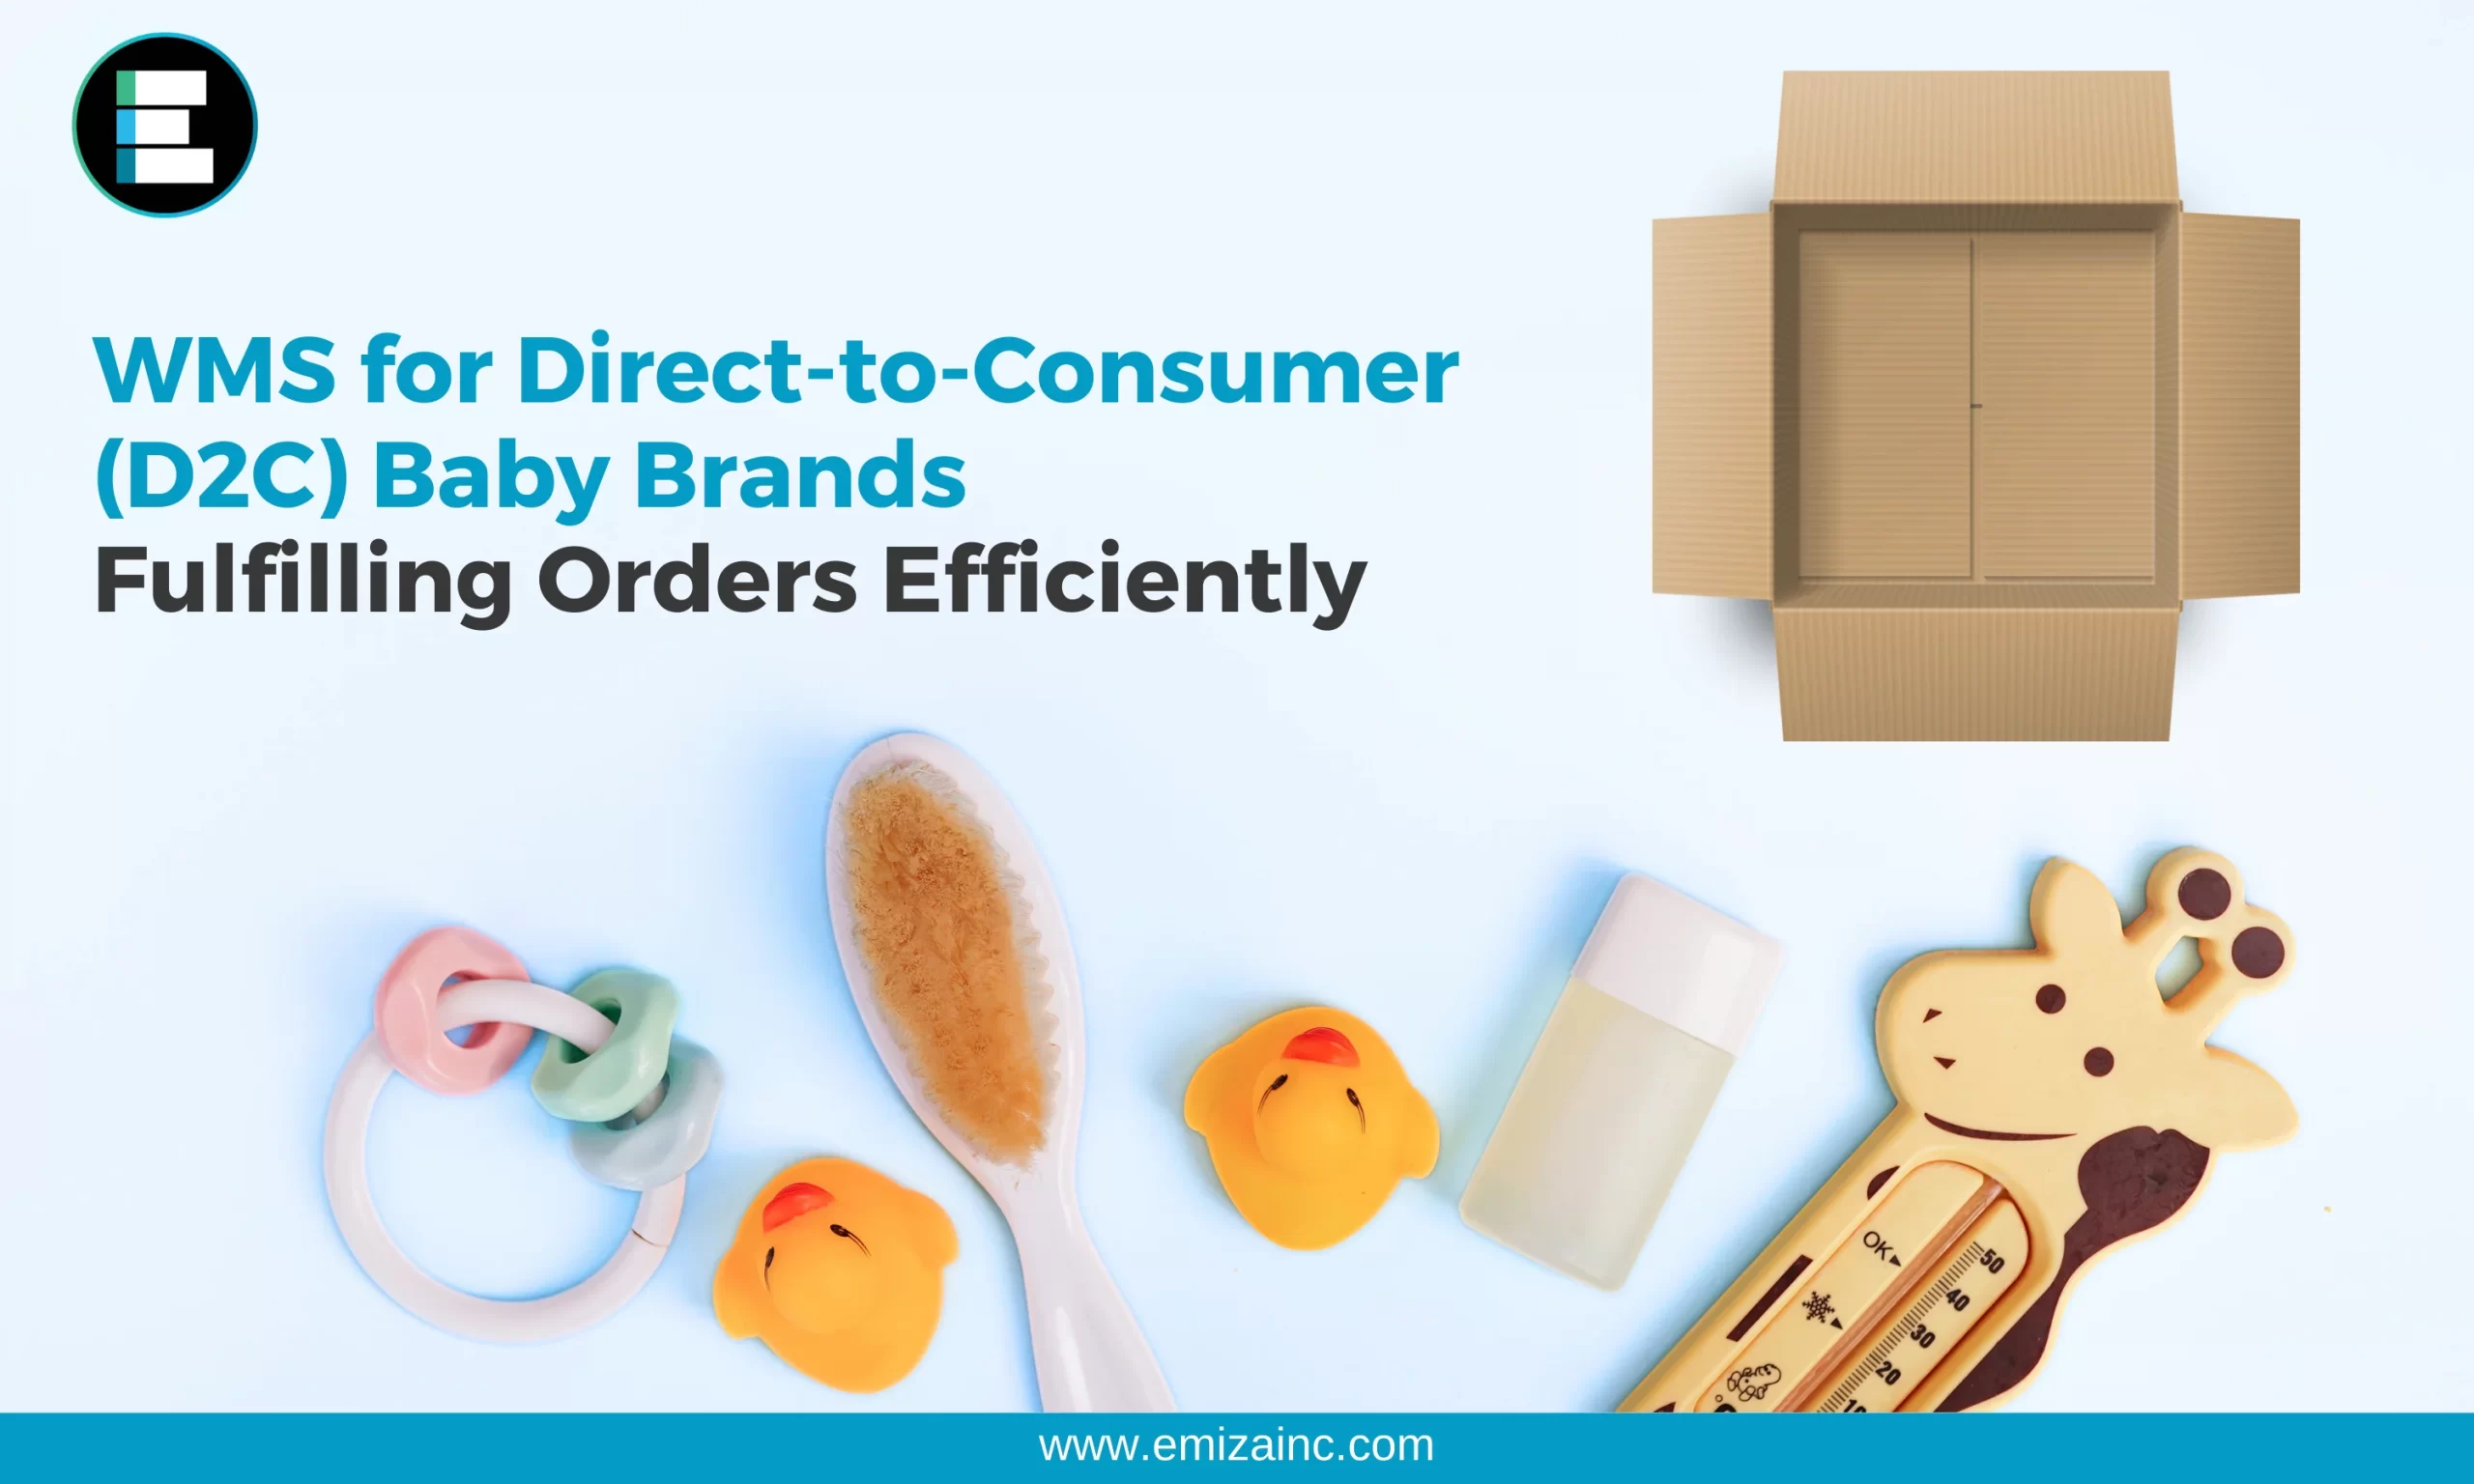 WMS for Direct-to-Consumer (D2C) Baby Brands Fulfilling Orders Efficiently